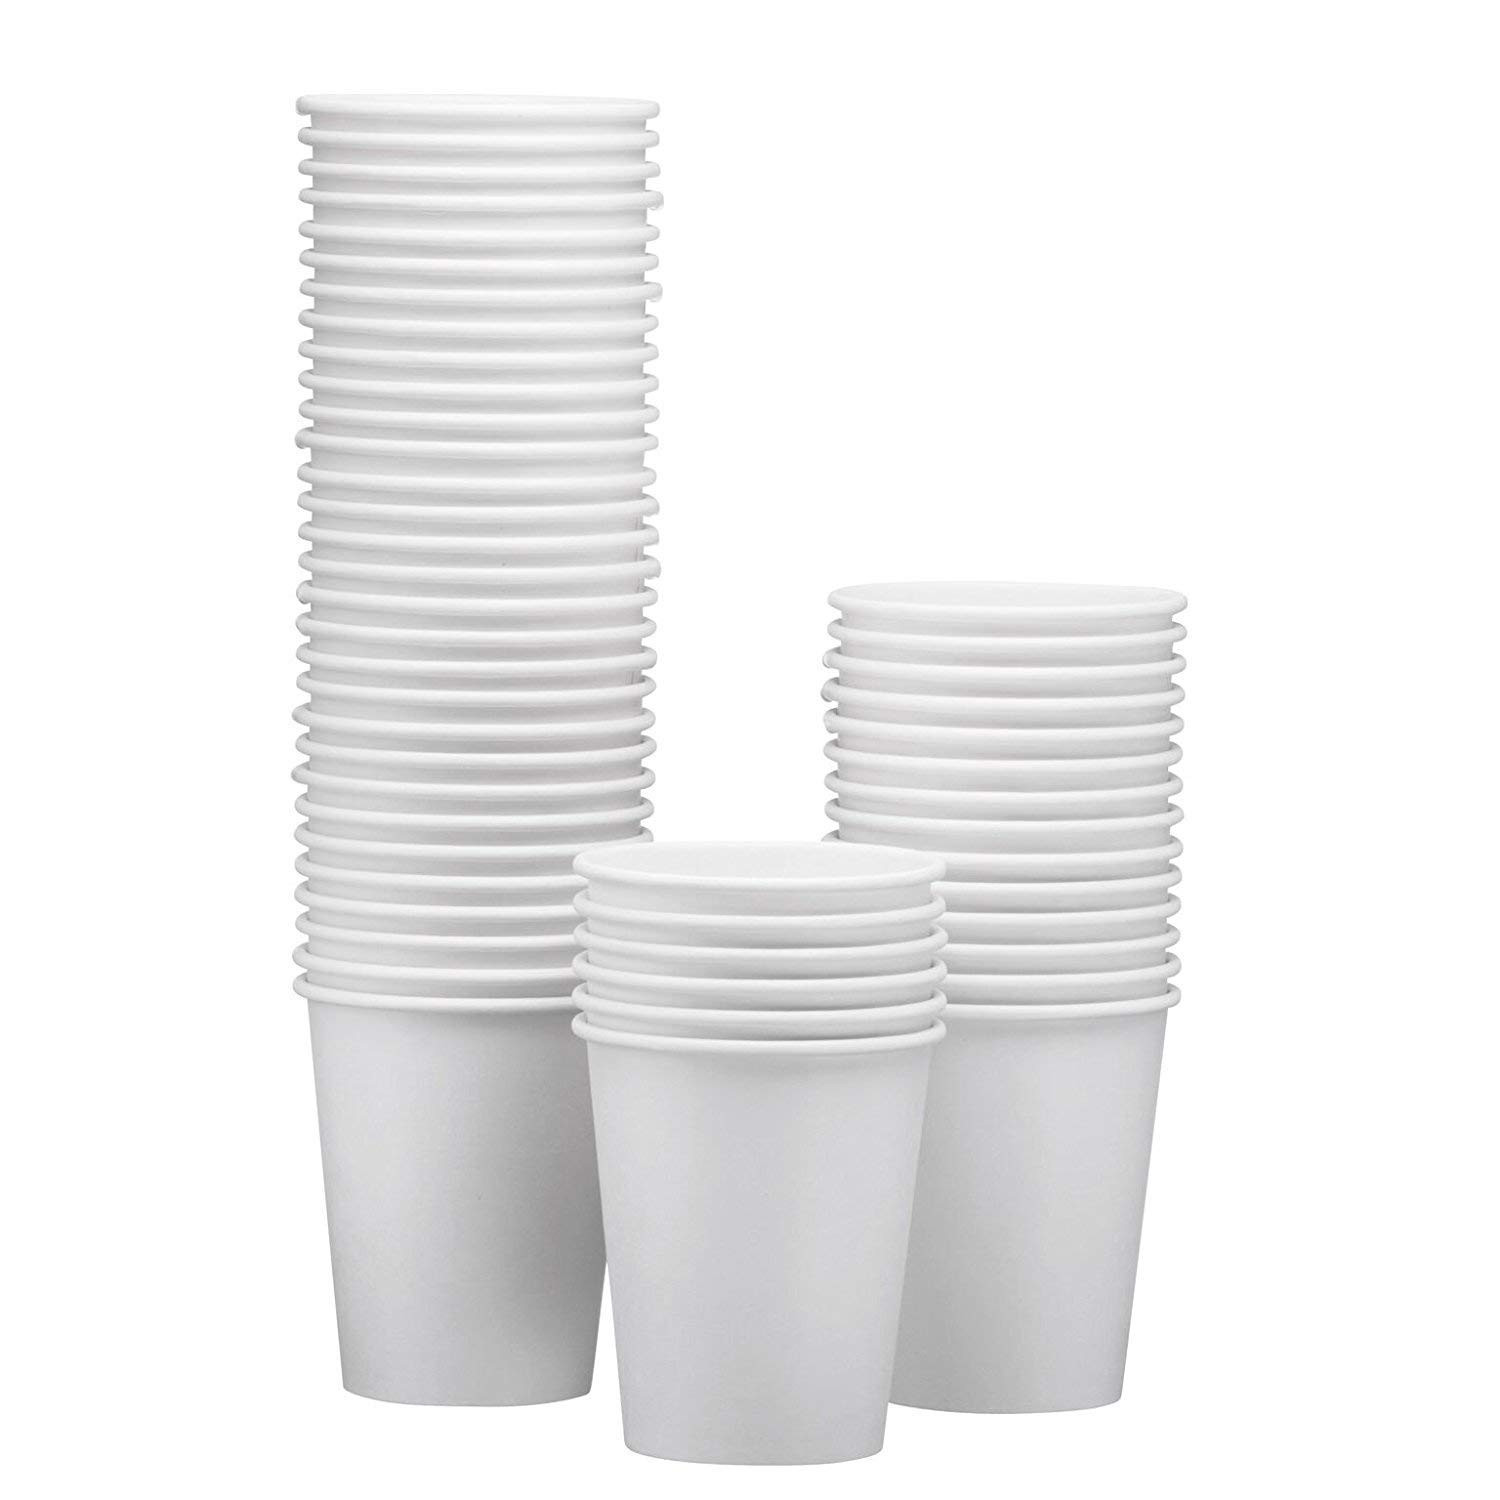 25 Elegant 16 Inch Cylinder Vases Bulk 2024 free download 16 inch cylinder vases bulk of amazon com white paper hot cup 12 ounce capacity pack of 50 with regard to amazon com white paper hot cup 12 ounce capacity pack of 50 kitchen dining